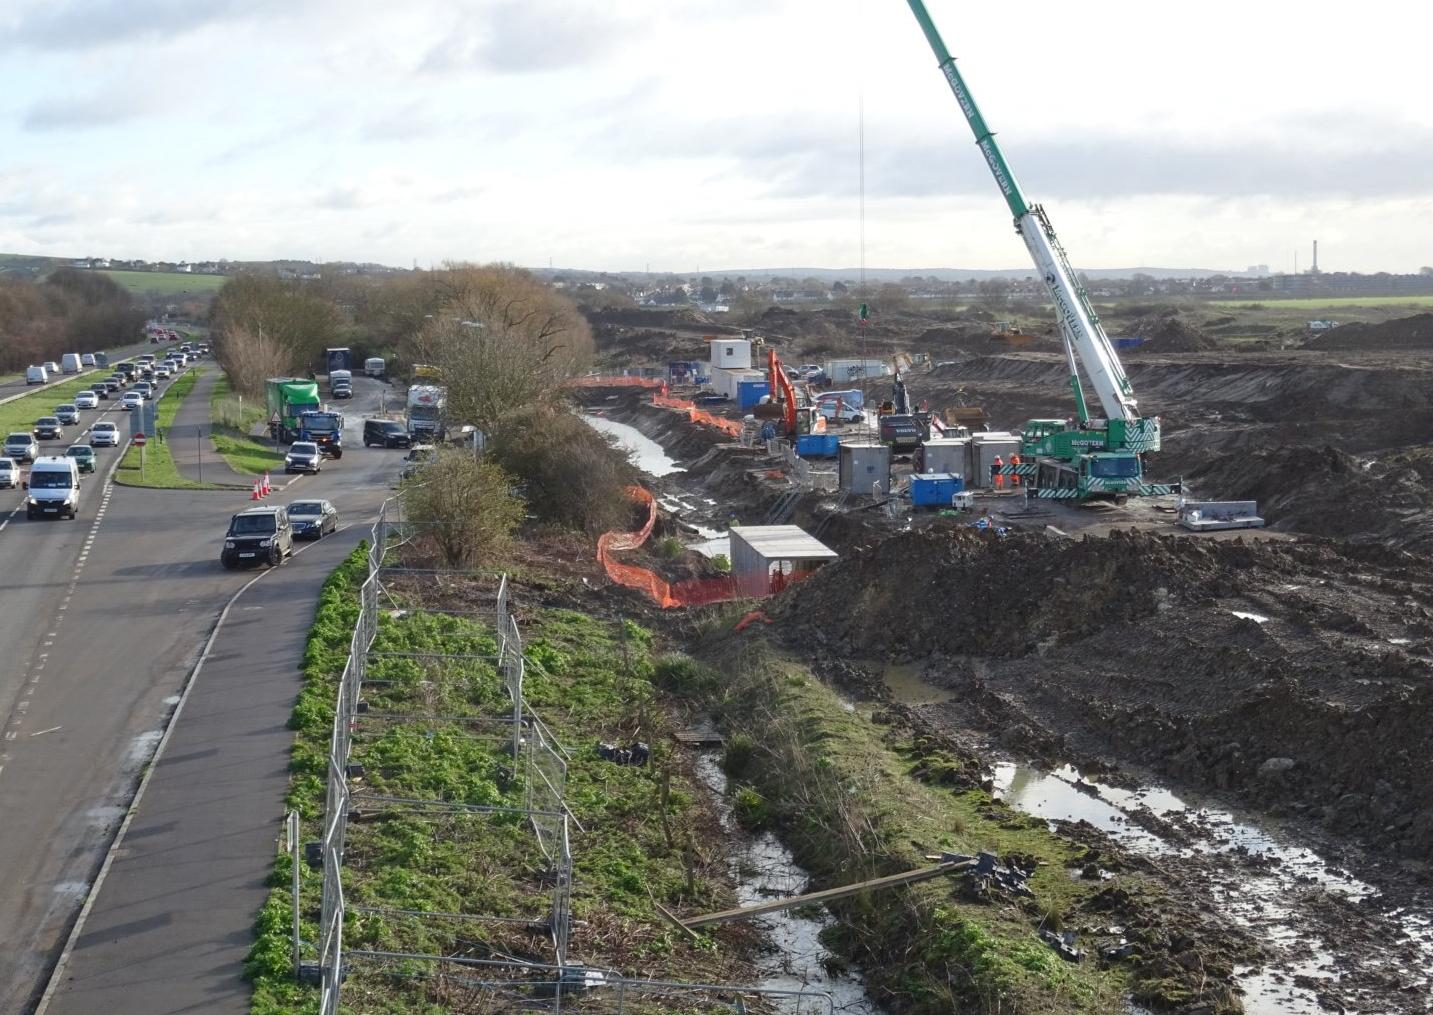 Work to transform New Monks Farm in Lancing into an IKEA and 600 homes is well underway